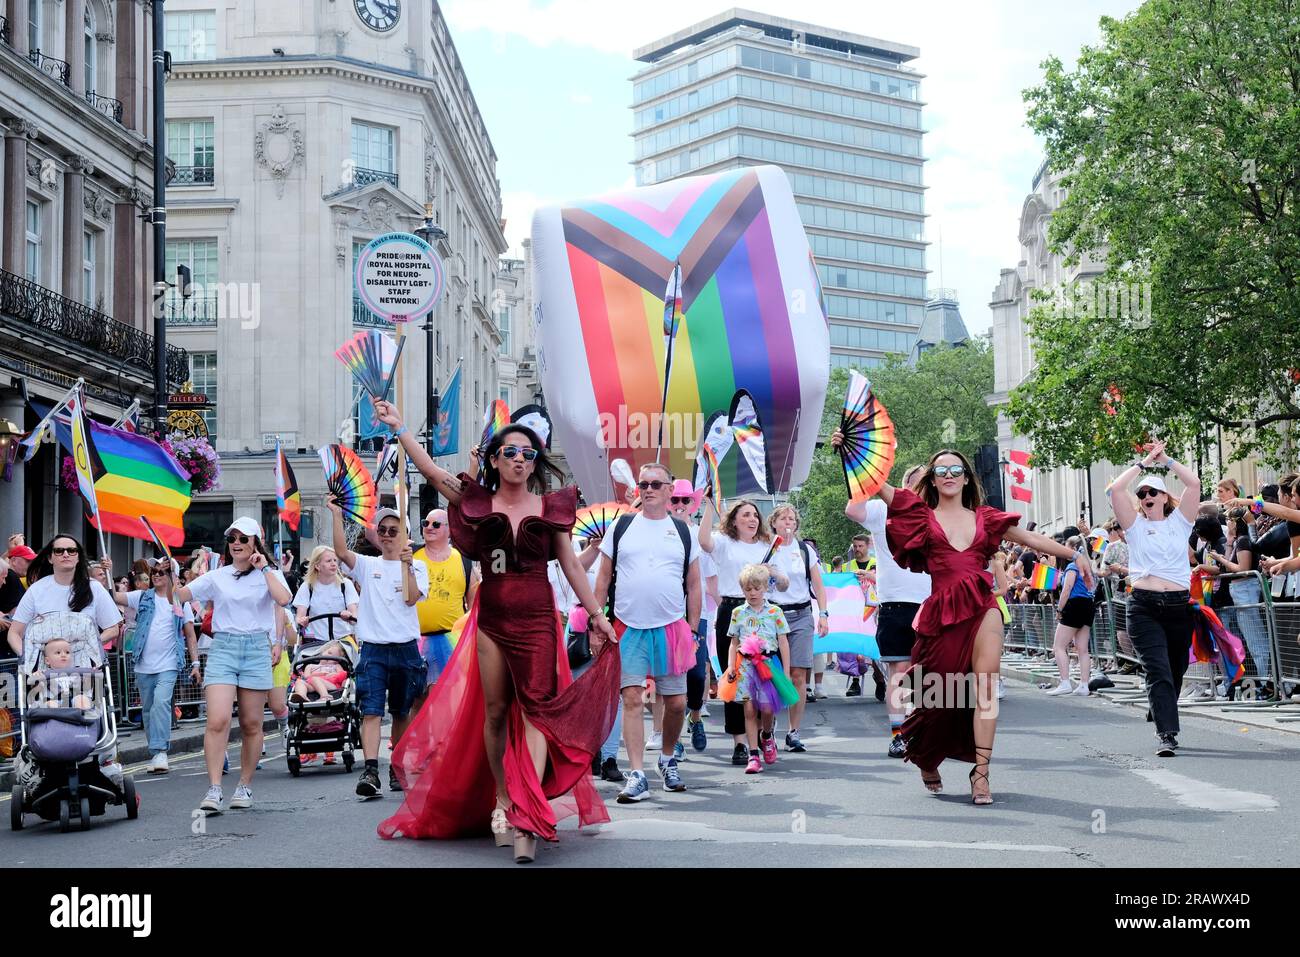 London, UK. Pride in London parade participants march with a giant inflatable with the LGBTQI+ flag printed on it. Stock Photo